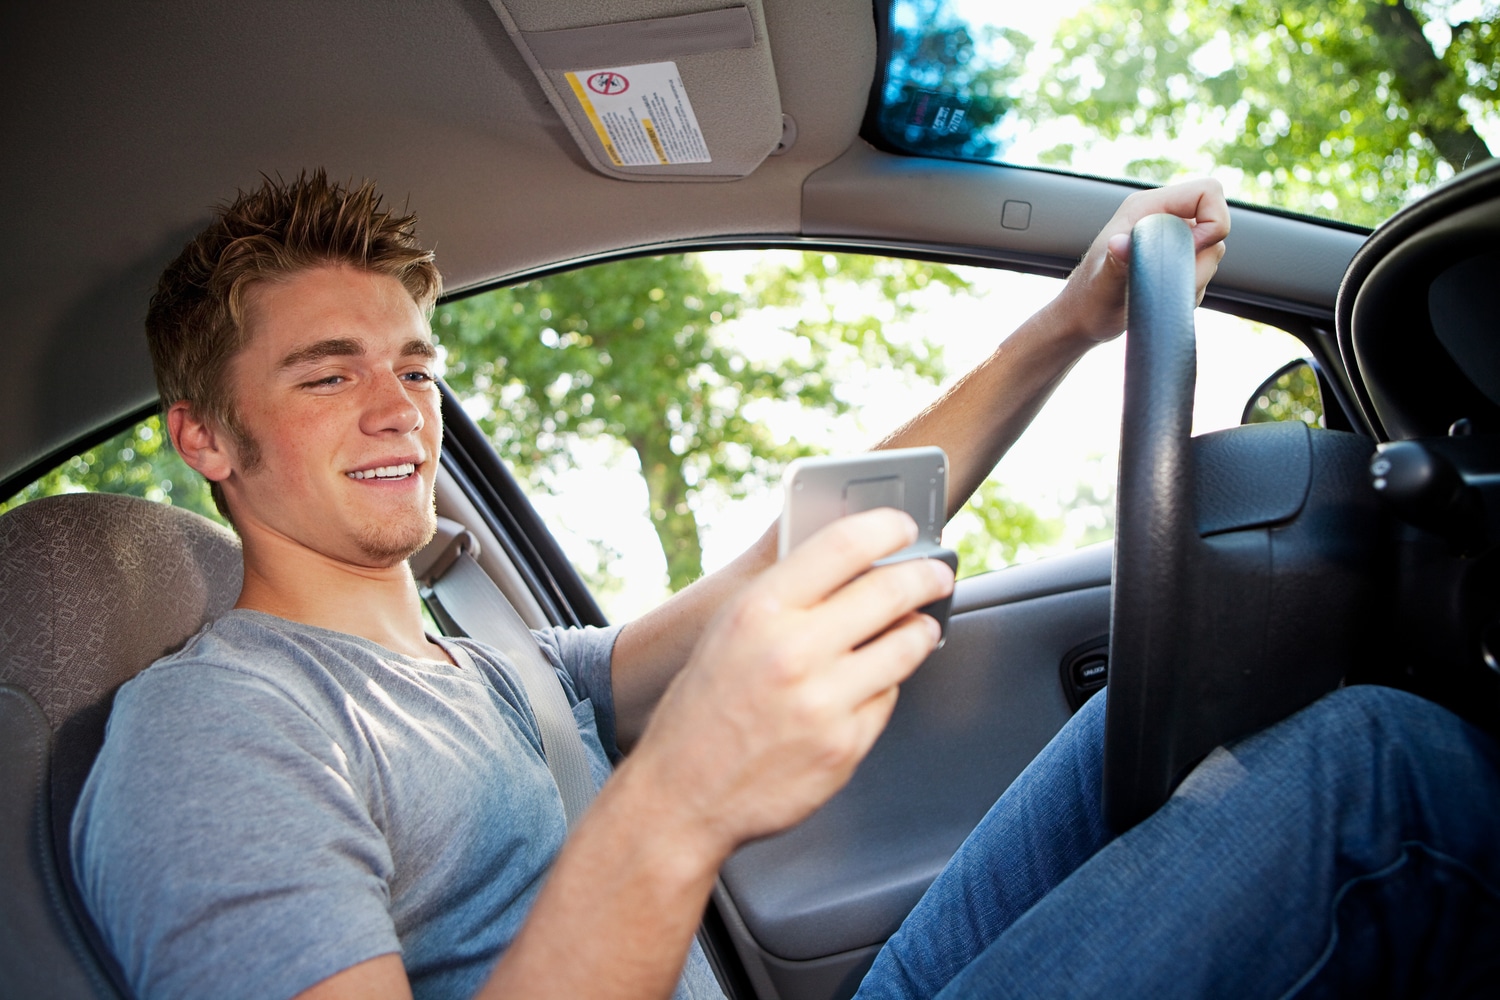 Distracted Driving Involves More Than Texting on the Road